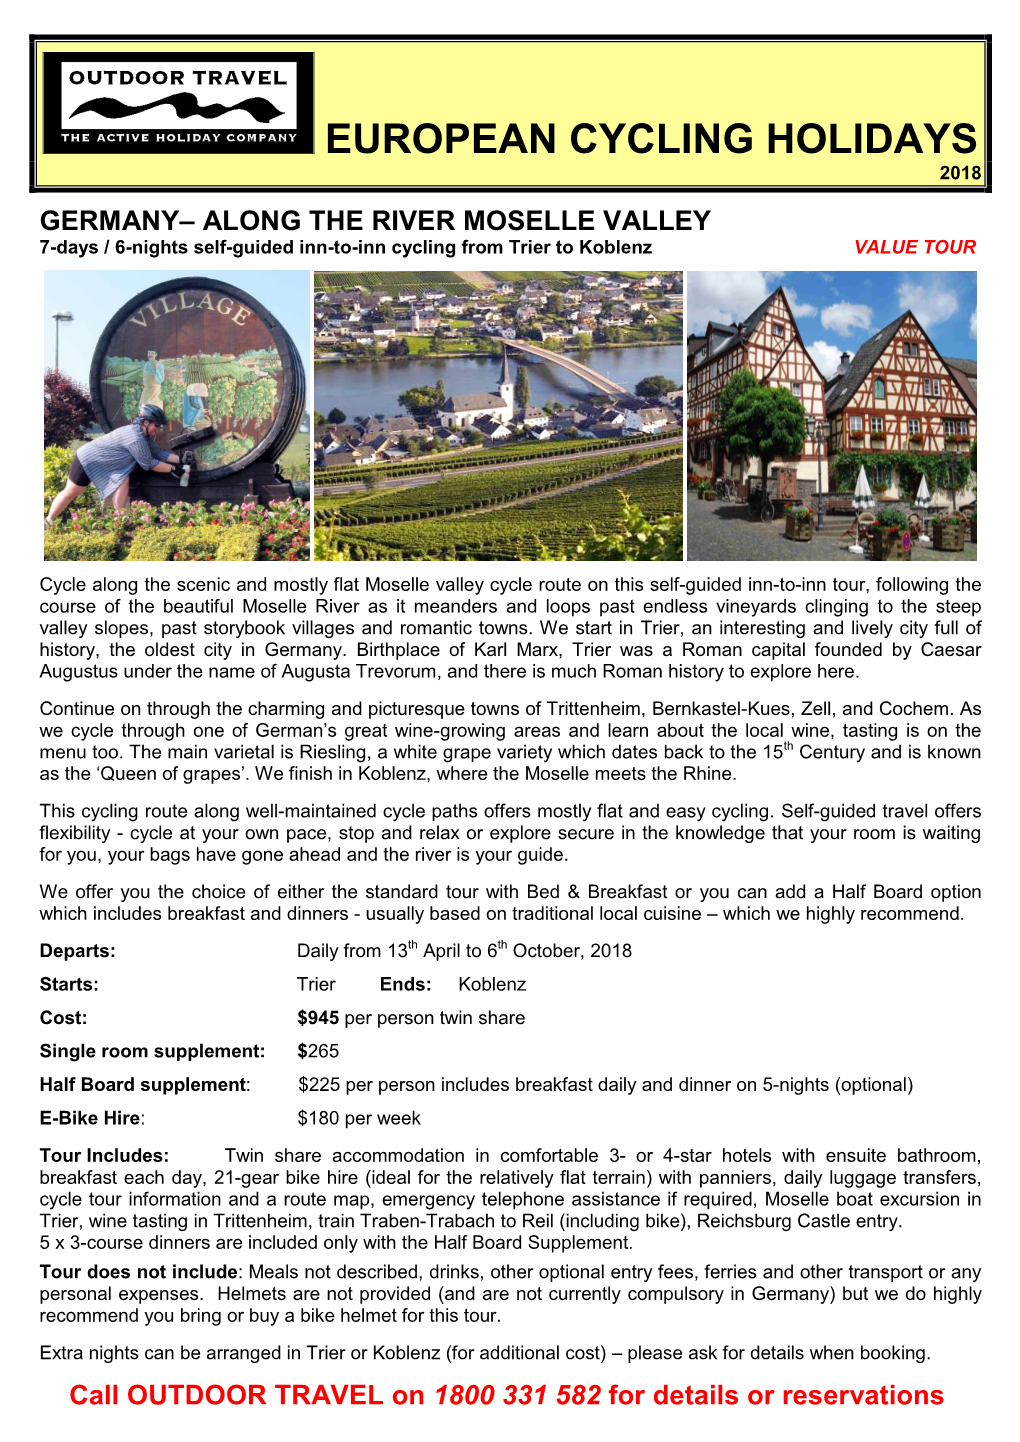 GERMANY– ALONG the RIVER MOSELLE VALLEY 7-Days / 6-Nights Self-Guided Inn-To-Inn Cycling from Trier to Koblenz VALUE TOUR